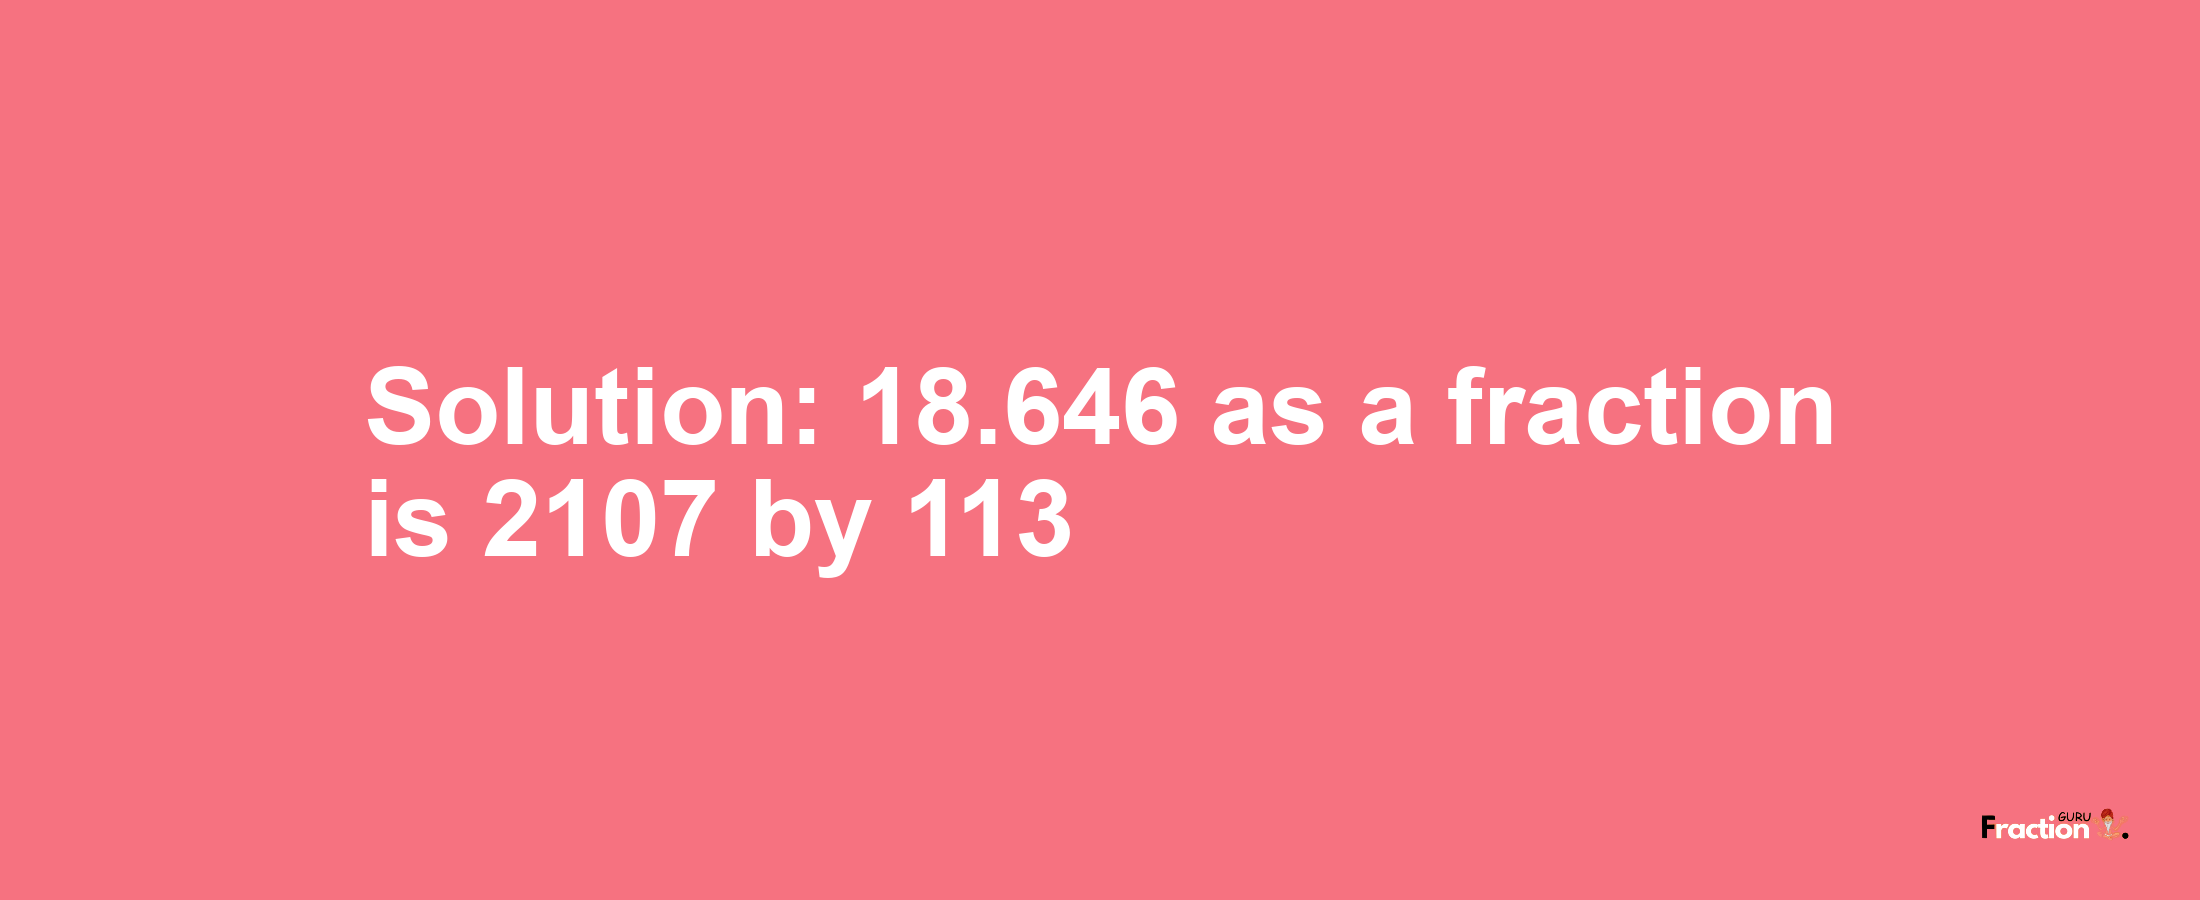 Solution:18.646 as a fraction is 2107/113